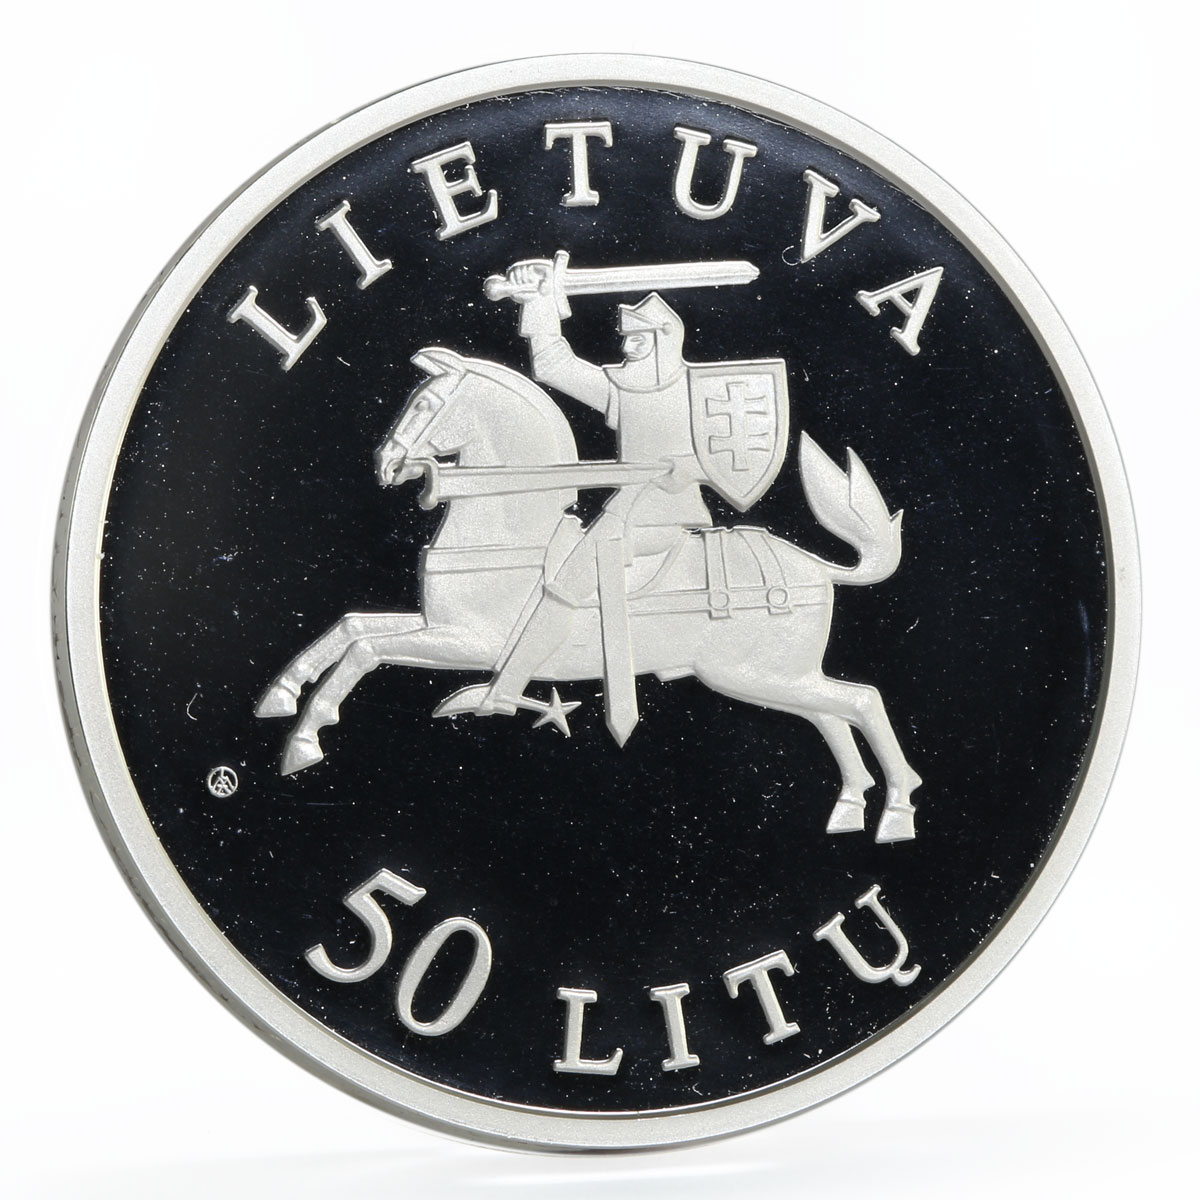 Lithuania 50 litu 10th Anniversary of Restored Independence silver coin 2000